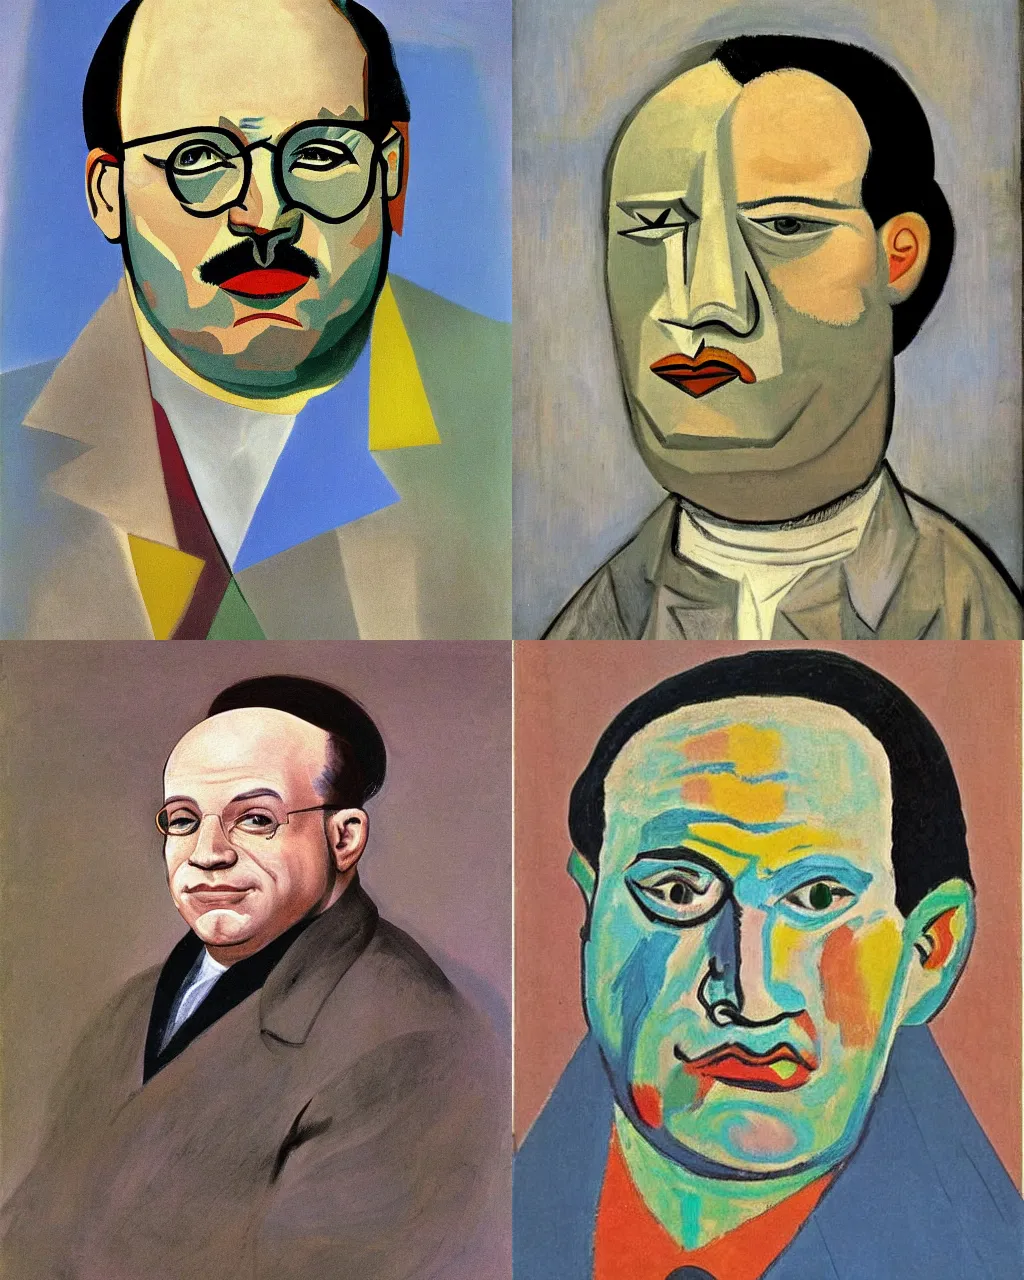 Prompt: A portrait of George Costanza painted by Pablo Picasso